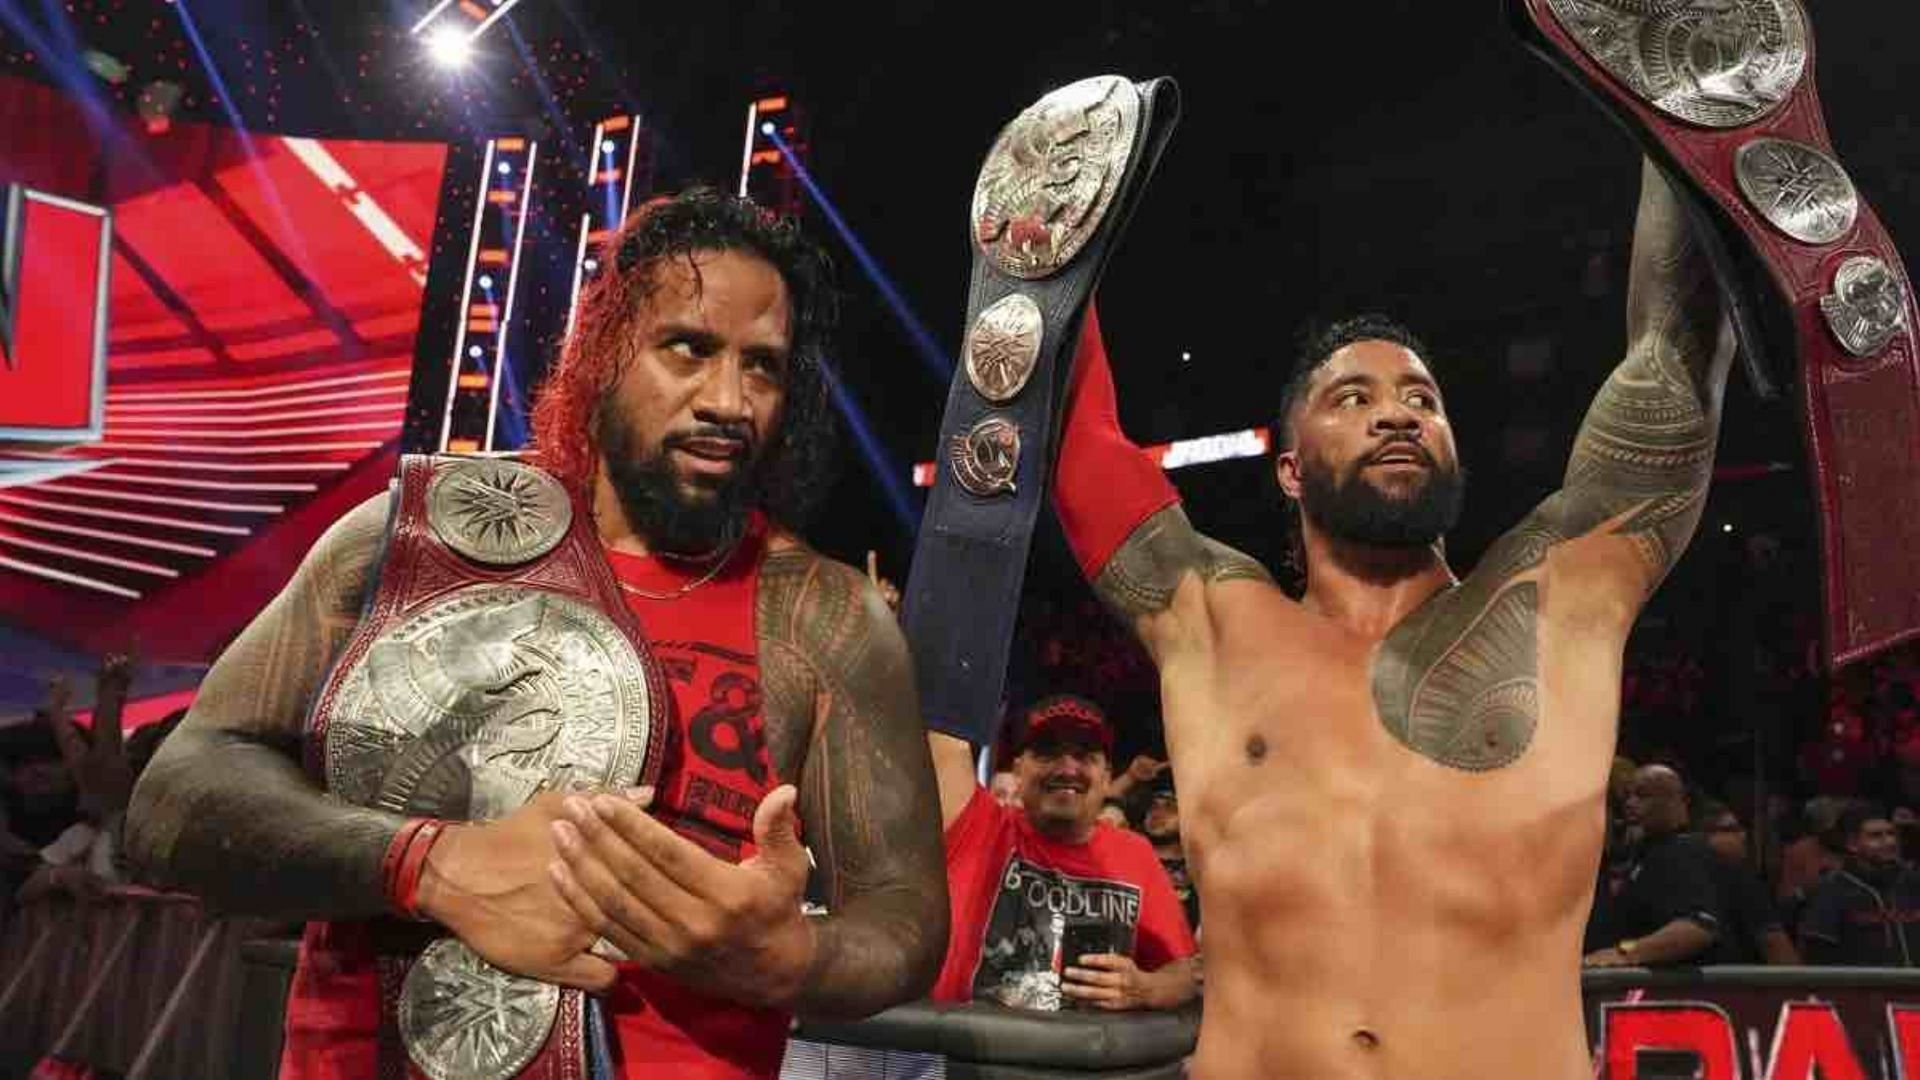 The Usos are former Undisputed WWE Tag Team Champions.